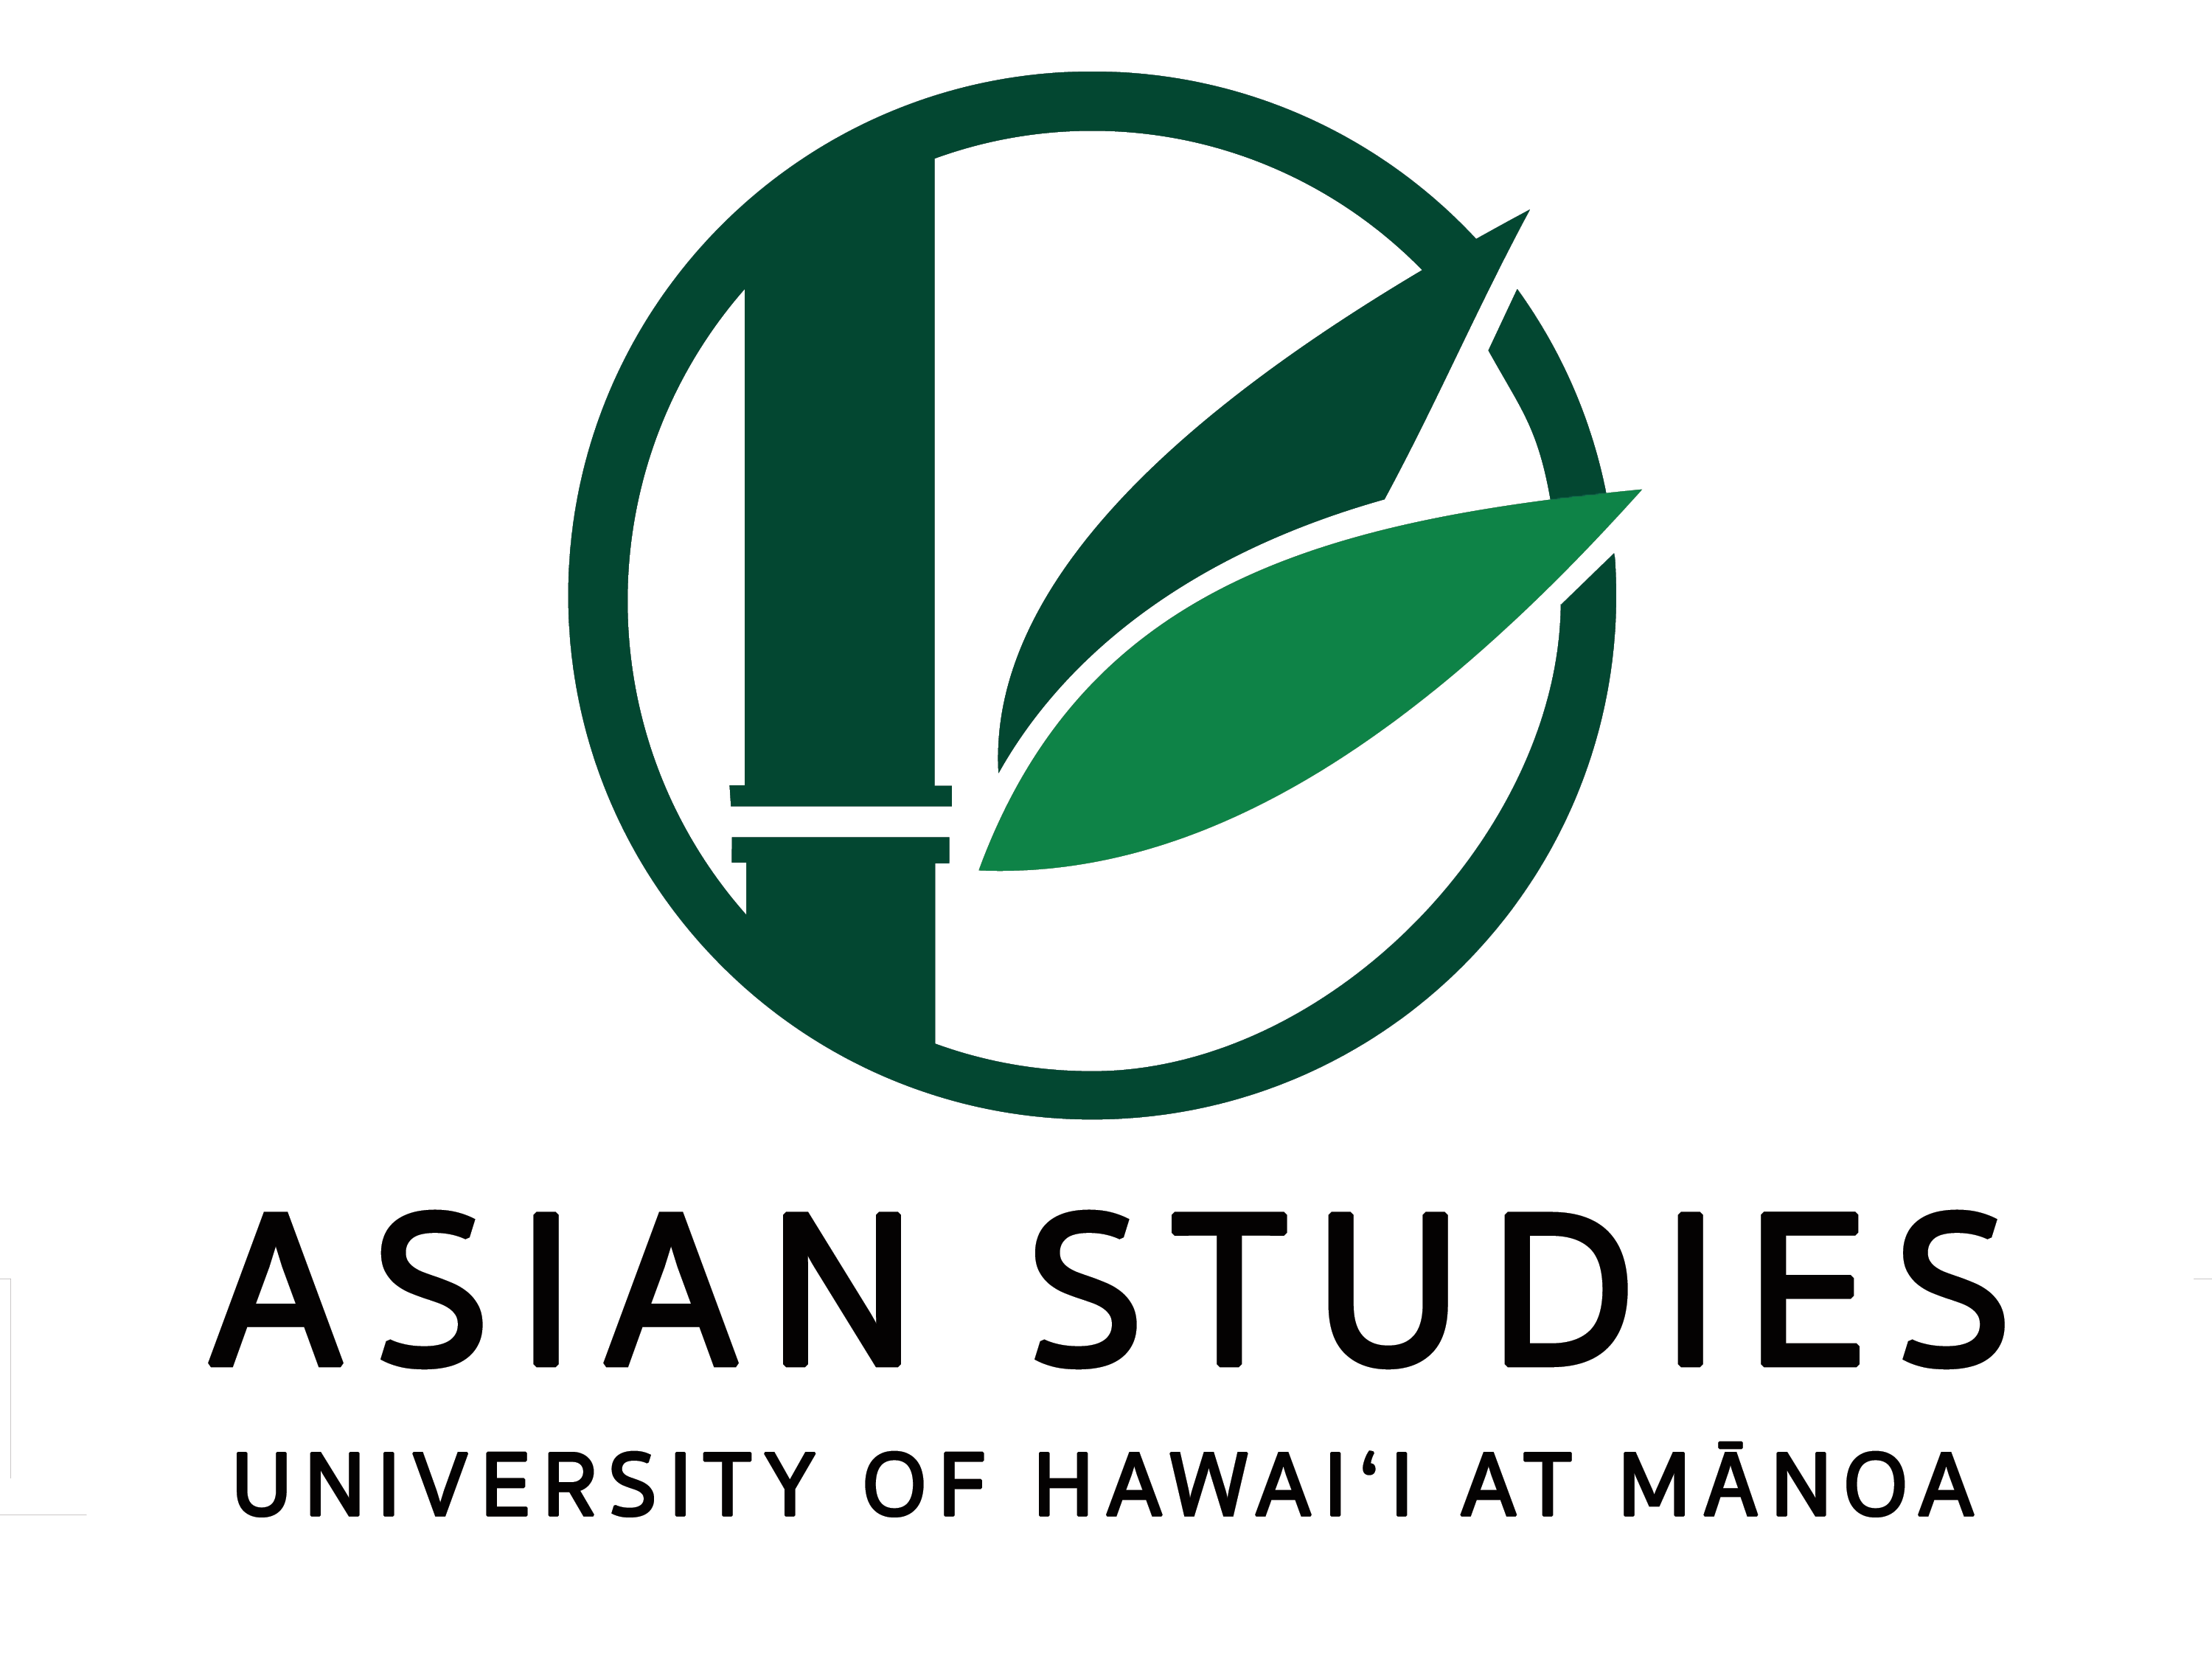 About - Department of Asian Studies